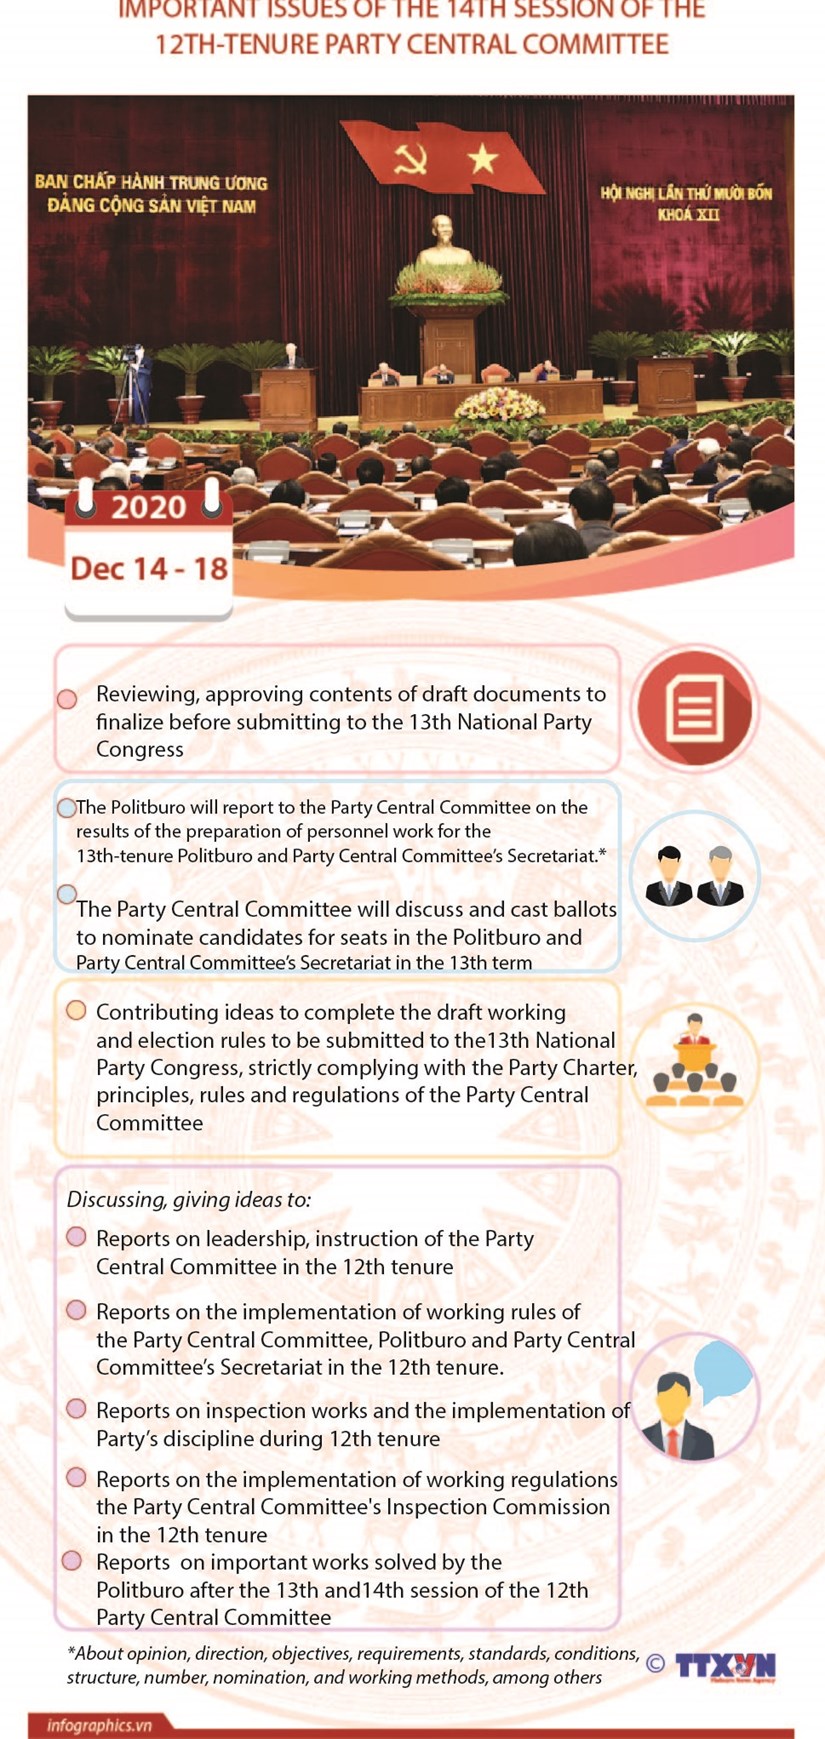 Important issues of Party Central Committee's 14th session hinh anh 1